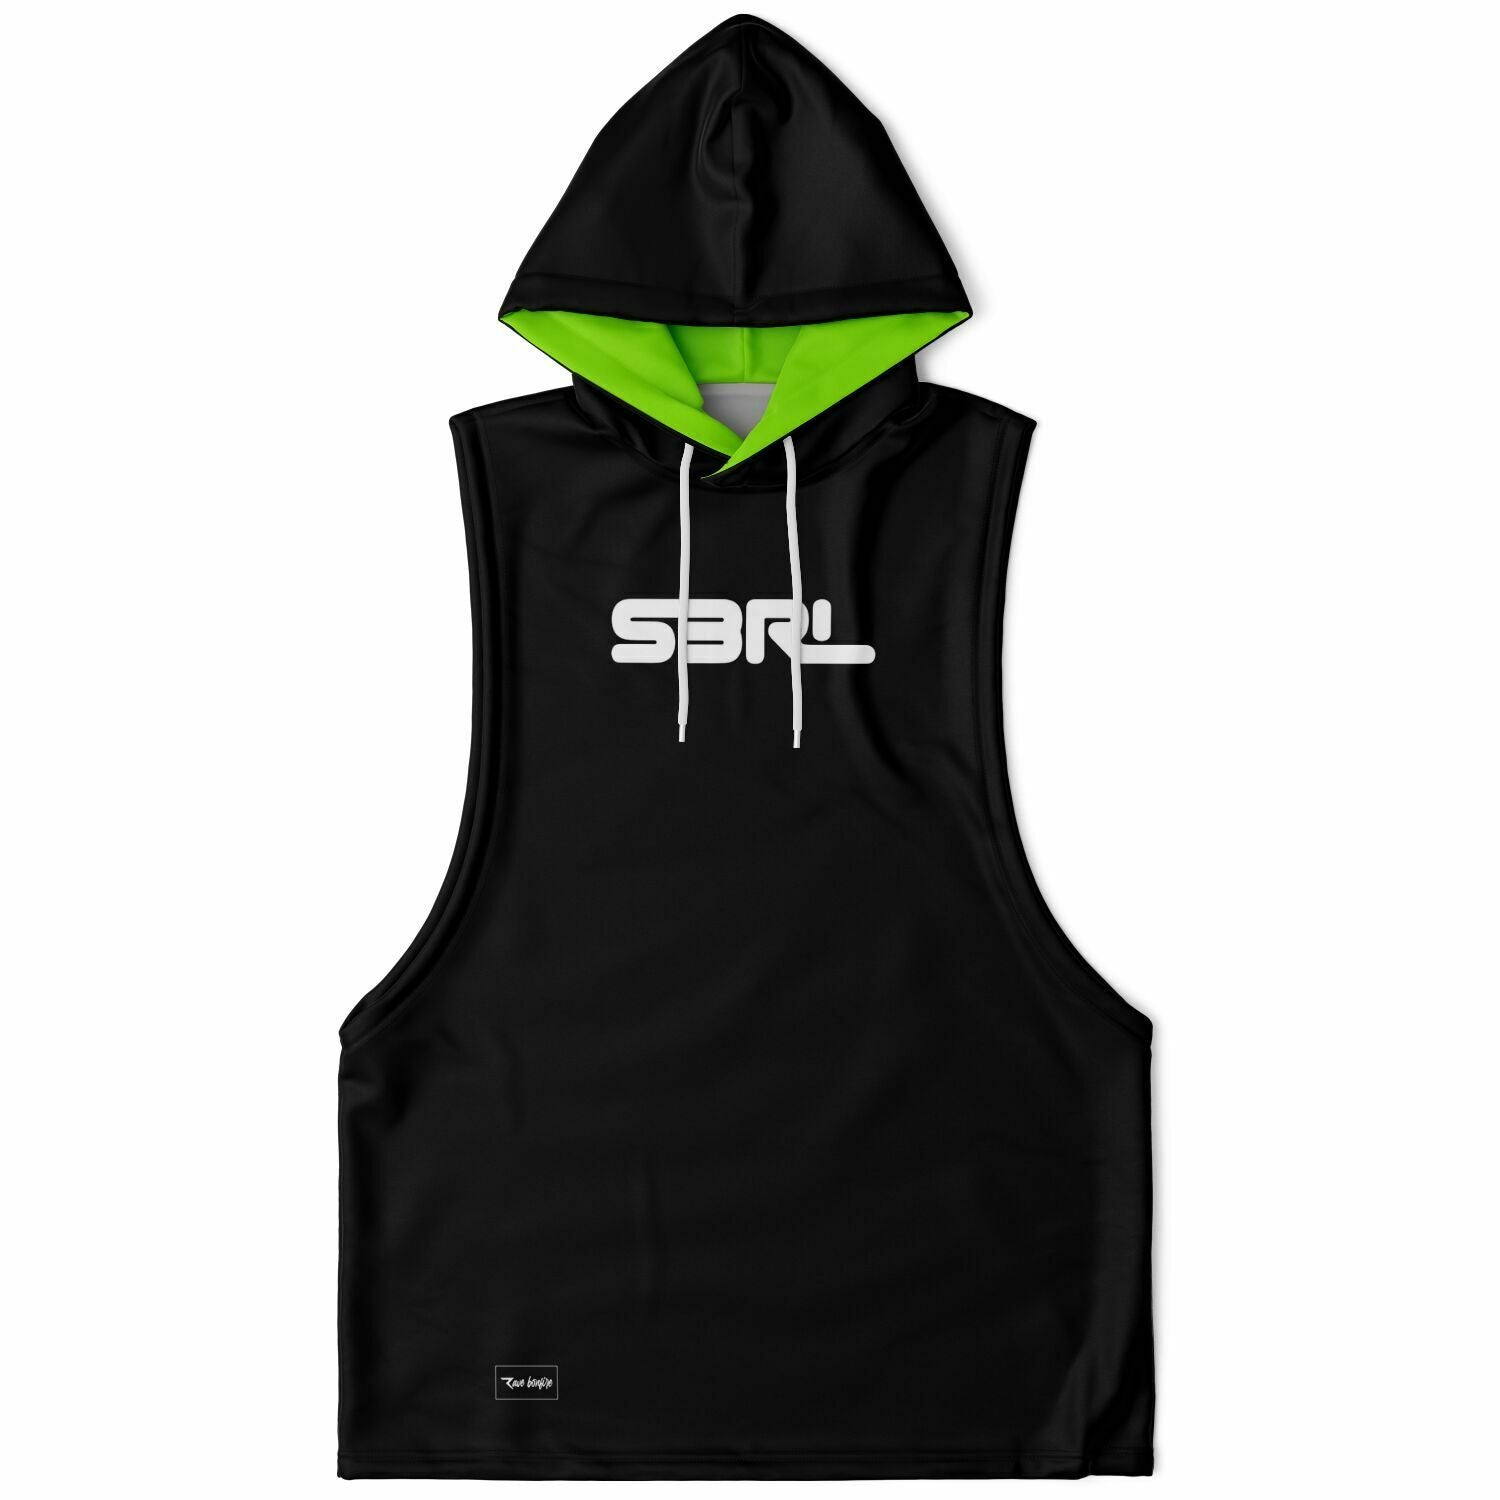 A black and green Forrest Fashion Sleeveless Hoodie with the word srl on it.